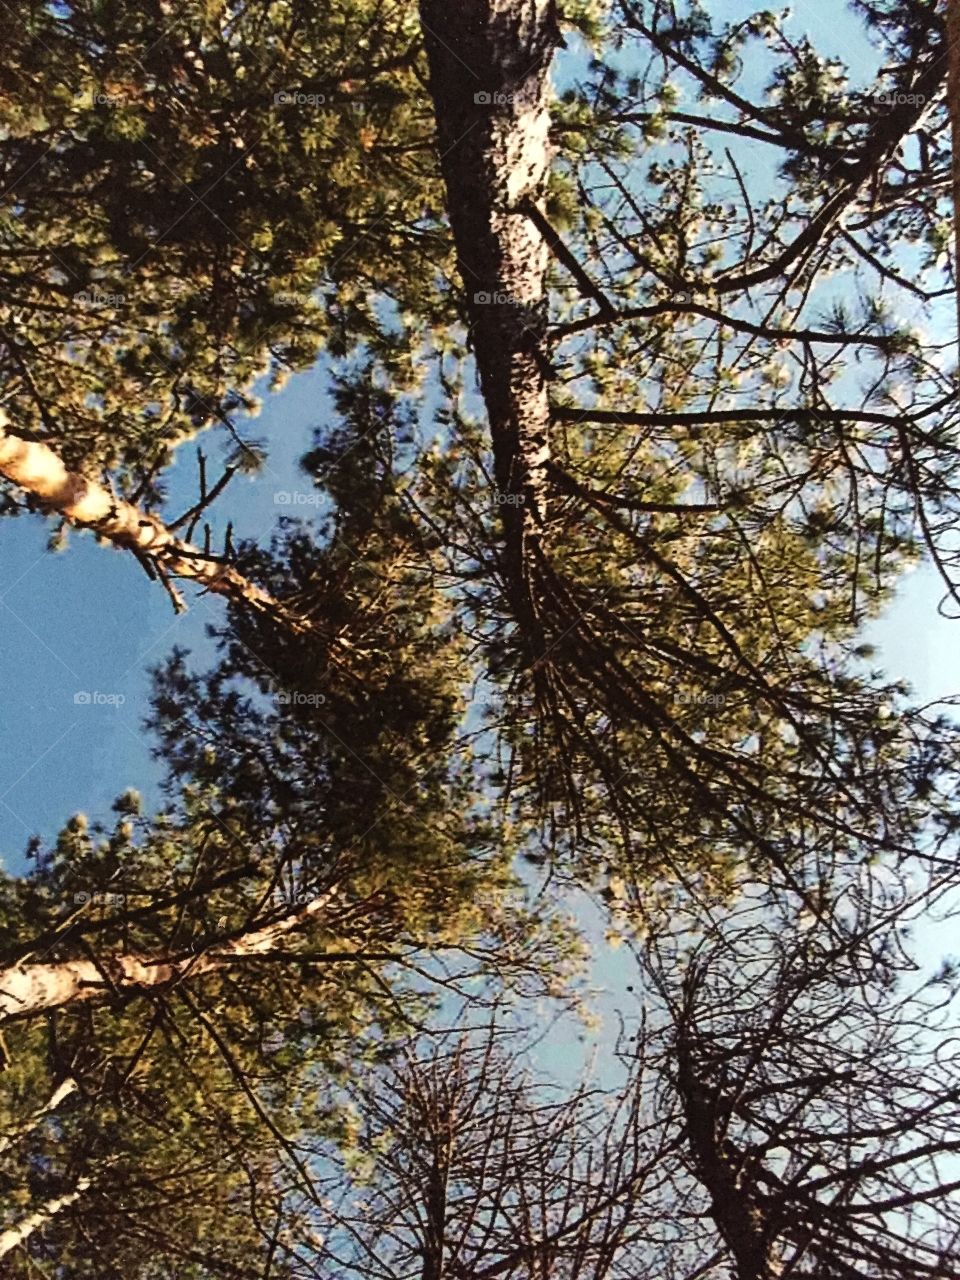 Looking up through tall pines. Hiking stopped to look up through tall pine trees